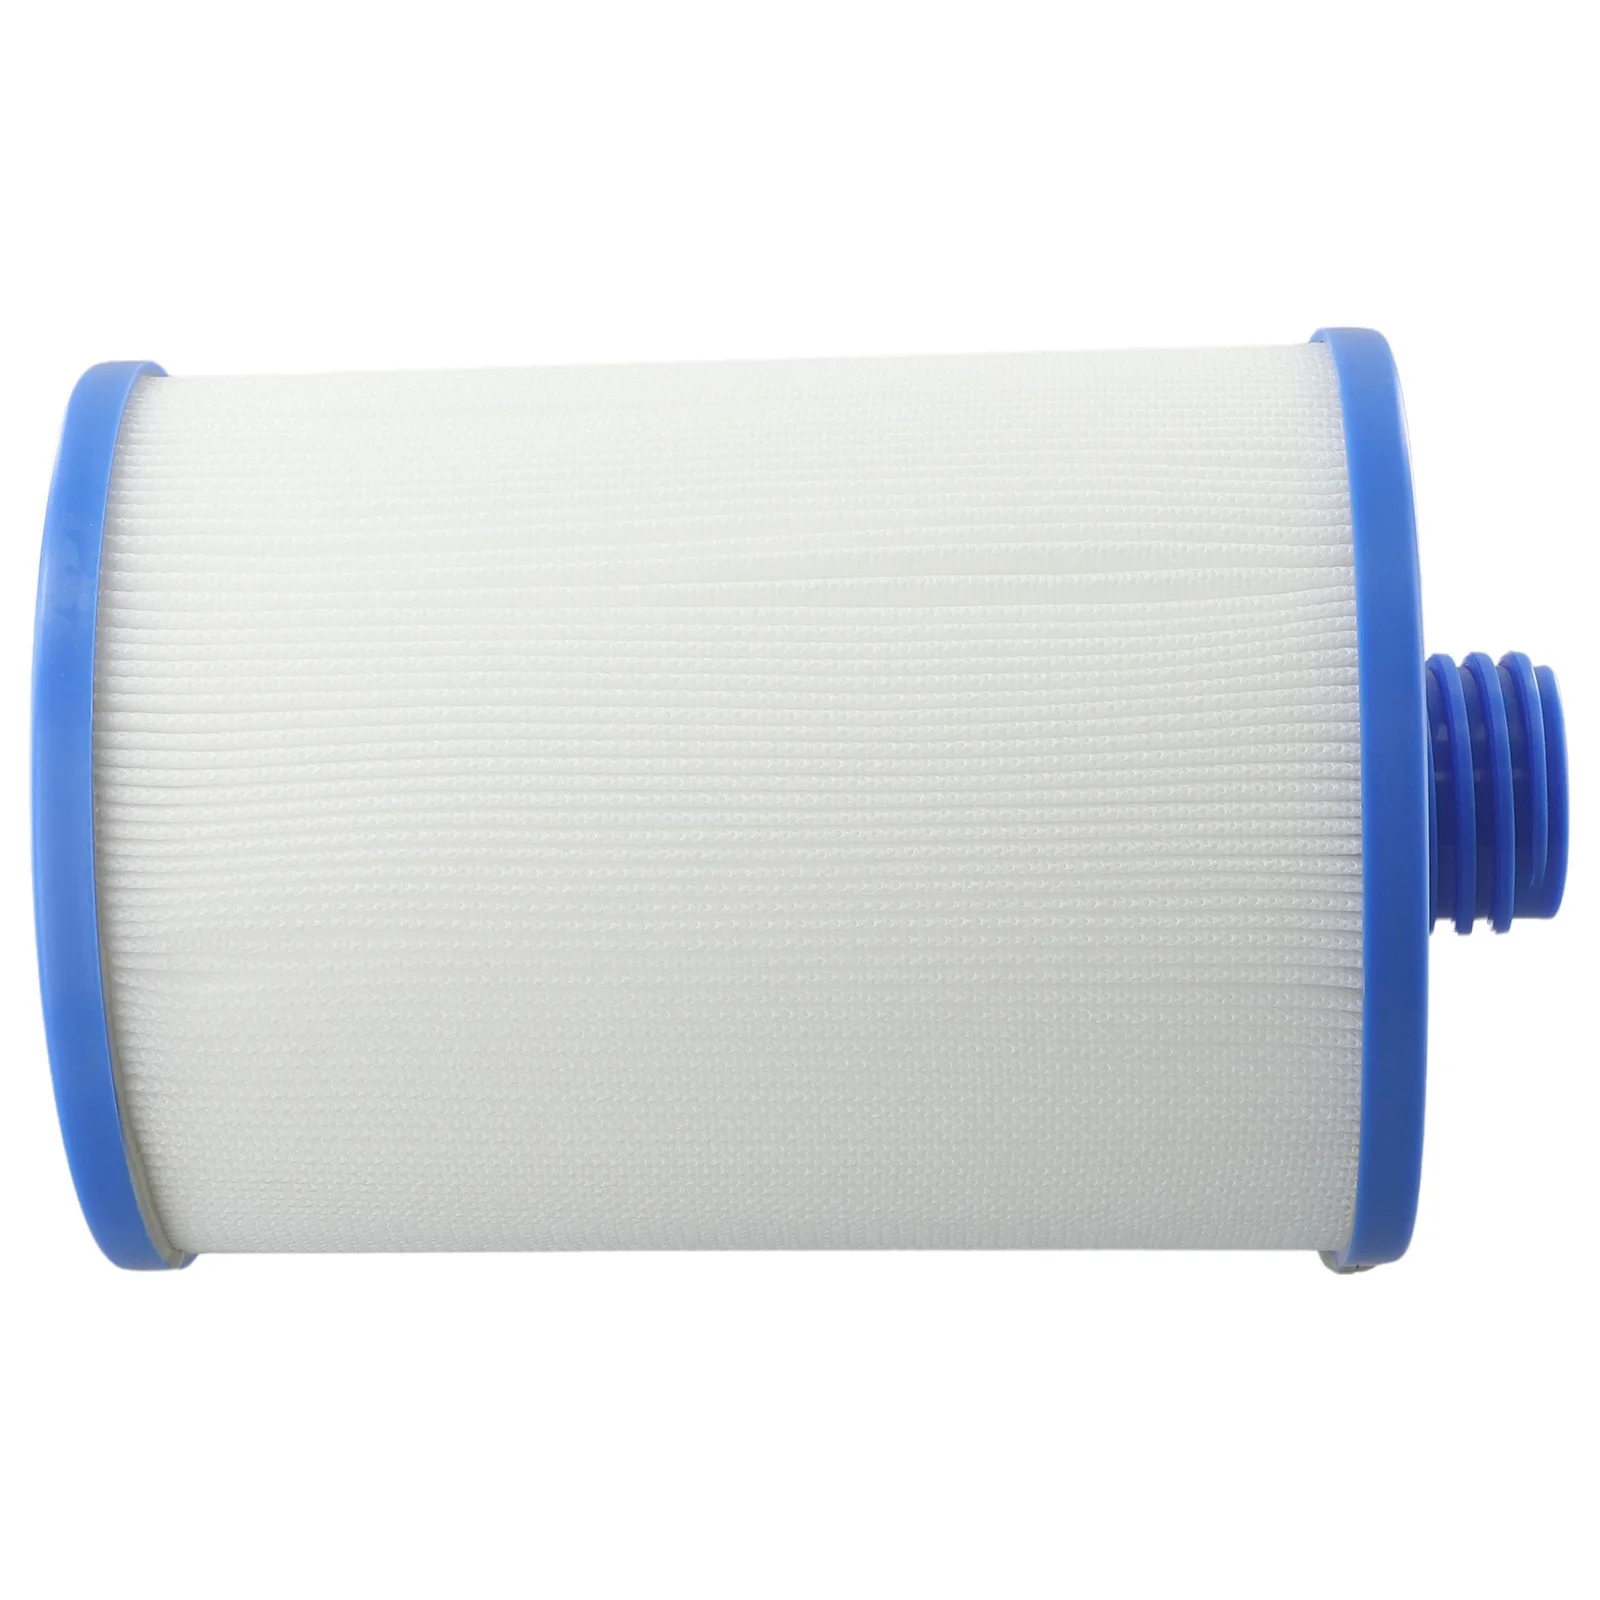 

Hot Tub Filter For PWW50 6CH-940 Superior Spas Elite Spa Tub Element Filter Tub Kids Children Swimming Pool Accessories